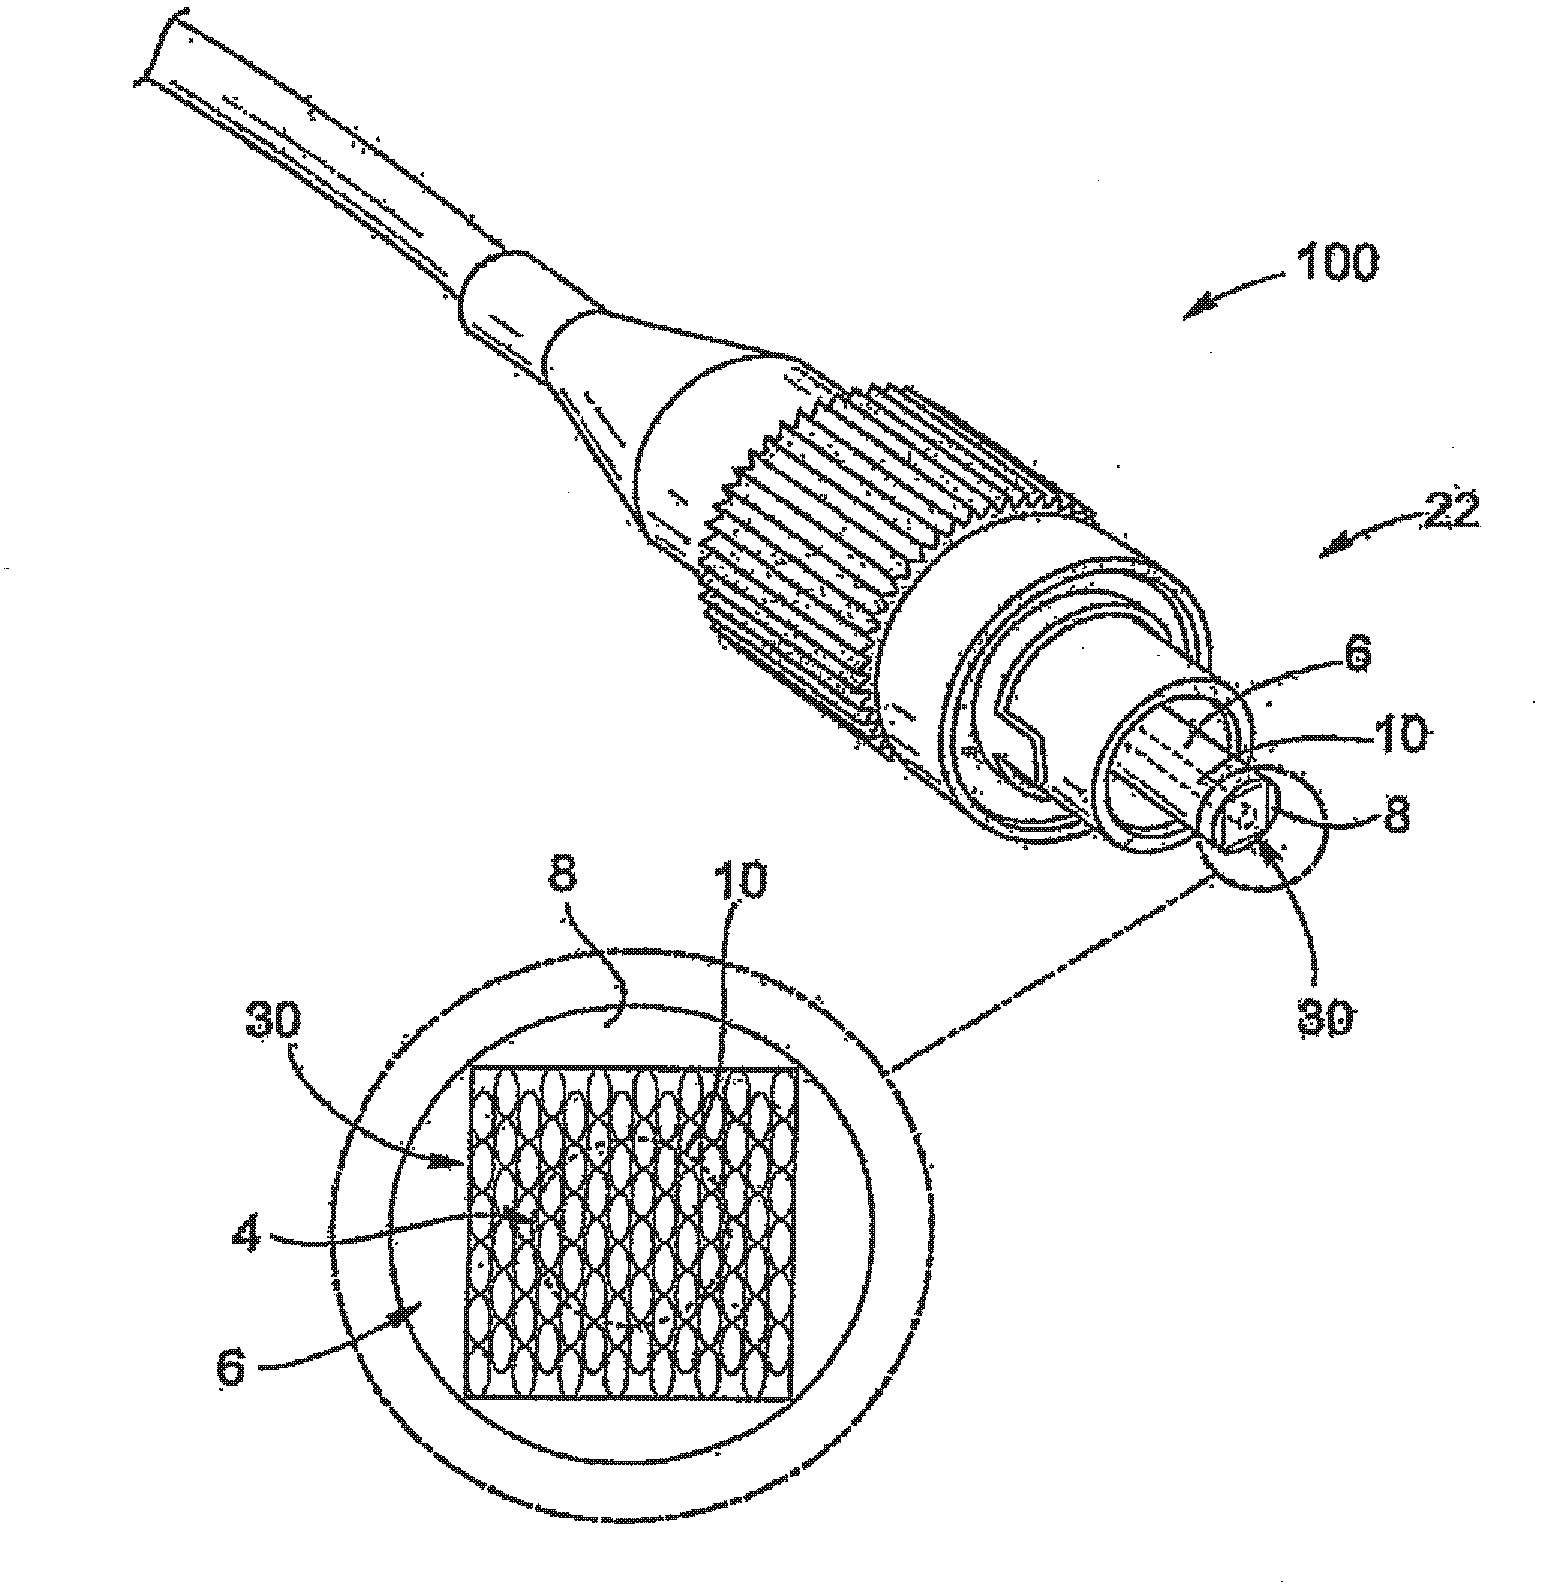 Graphene-based saturable absorber devices and methods